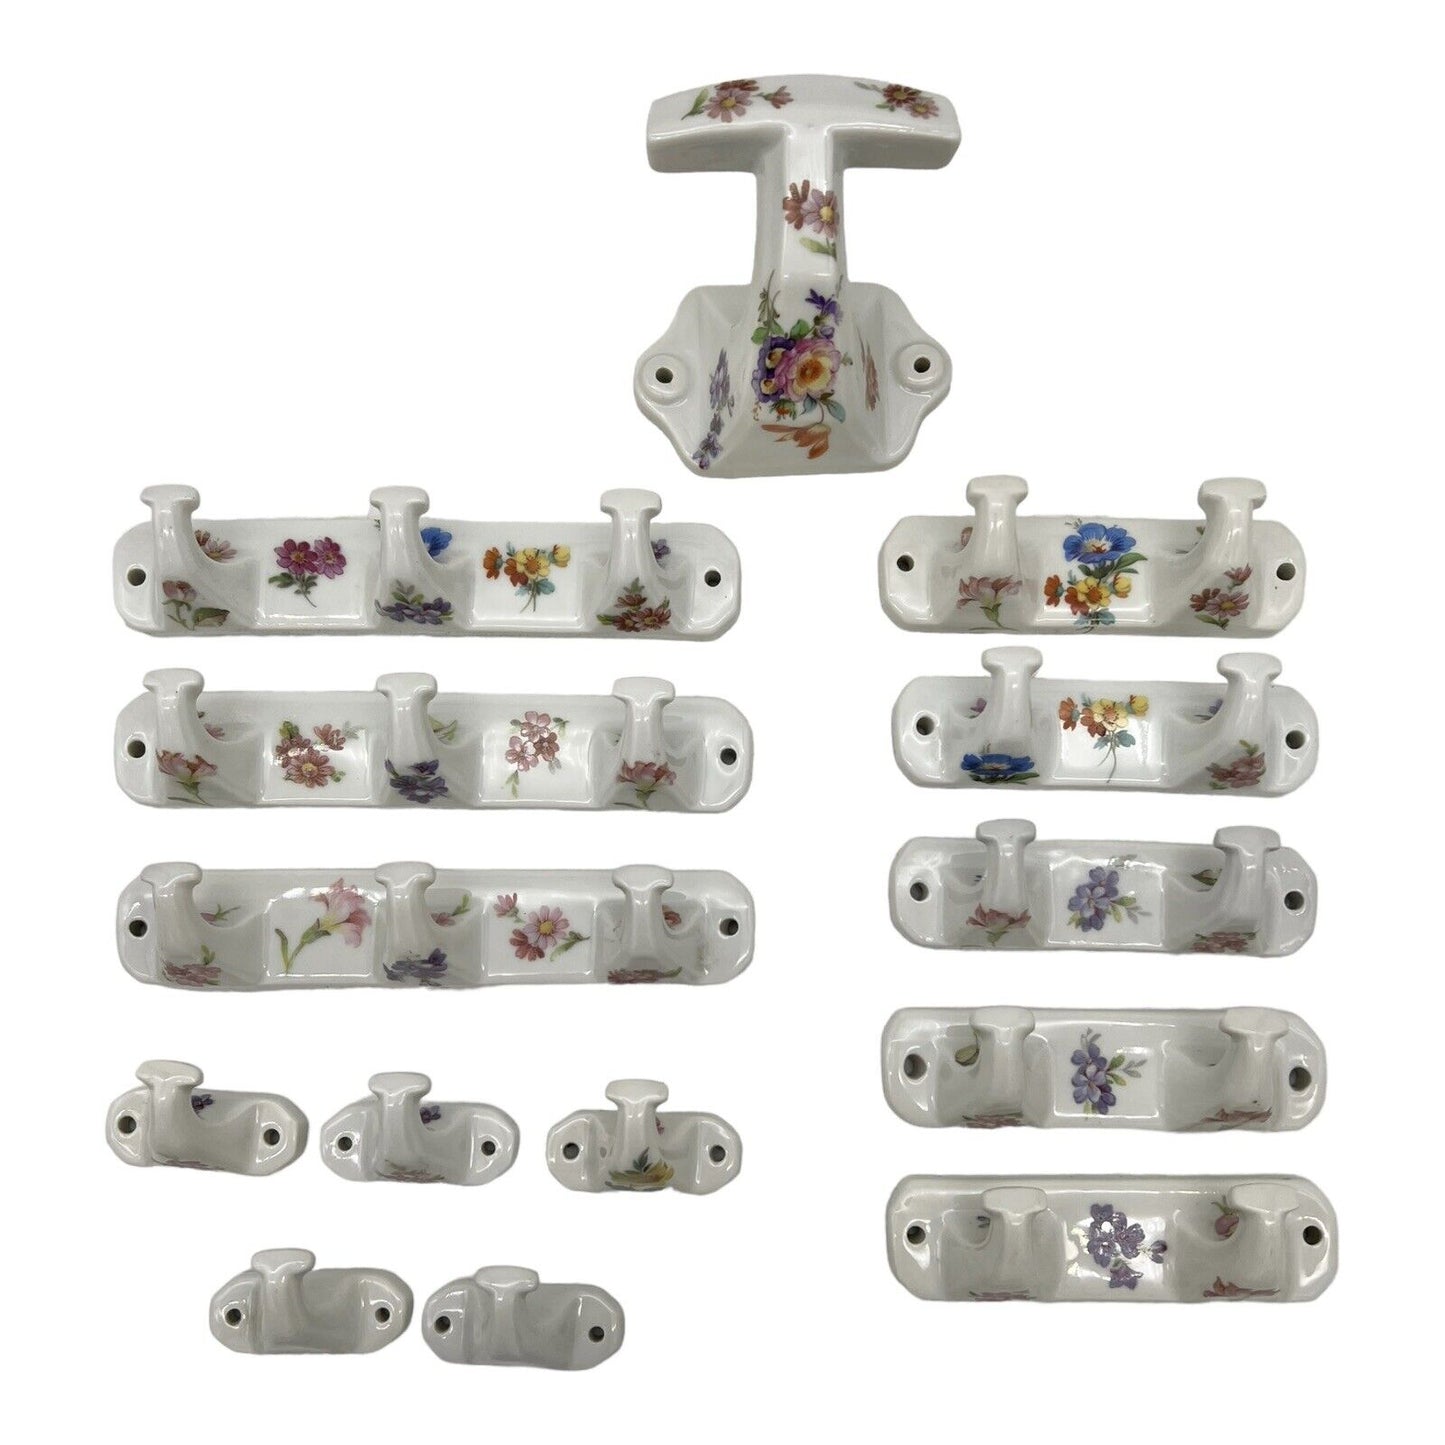 Collection of 14 French Vintage Limoges Porcelain Bathroom Hooks in Various Sizes